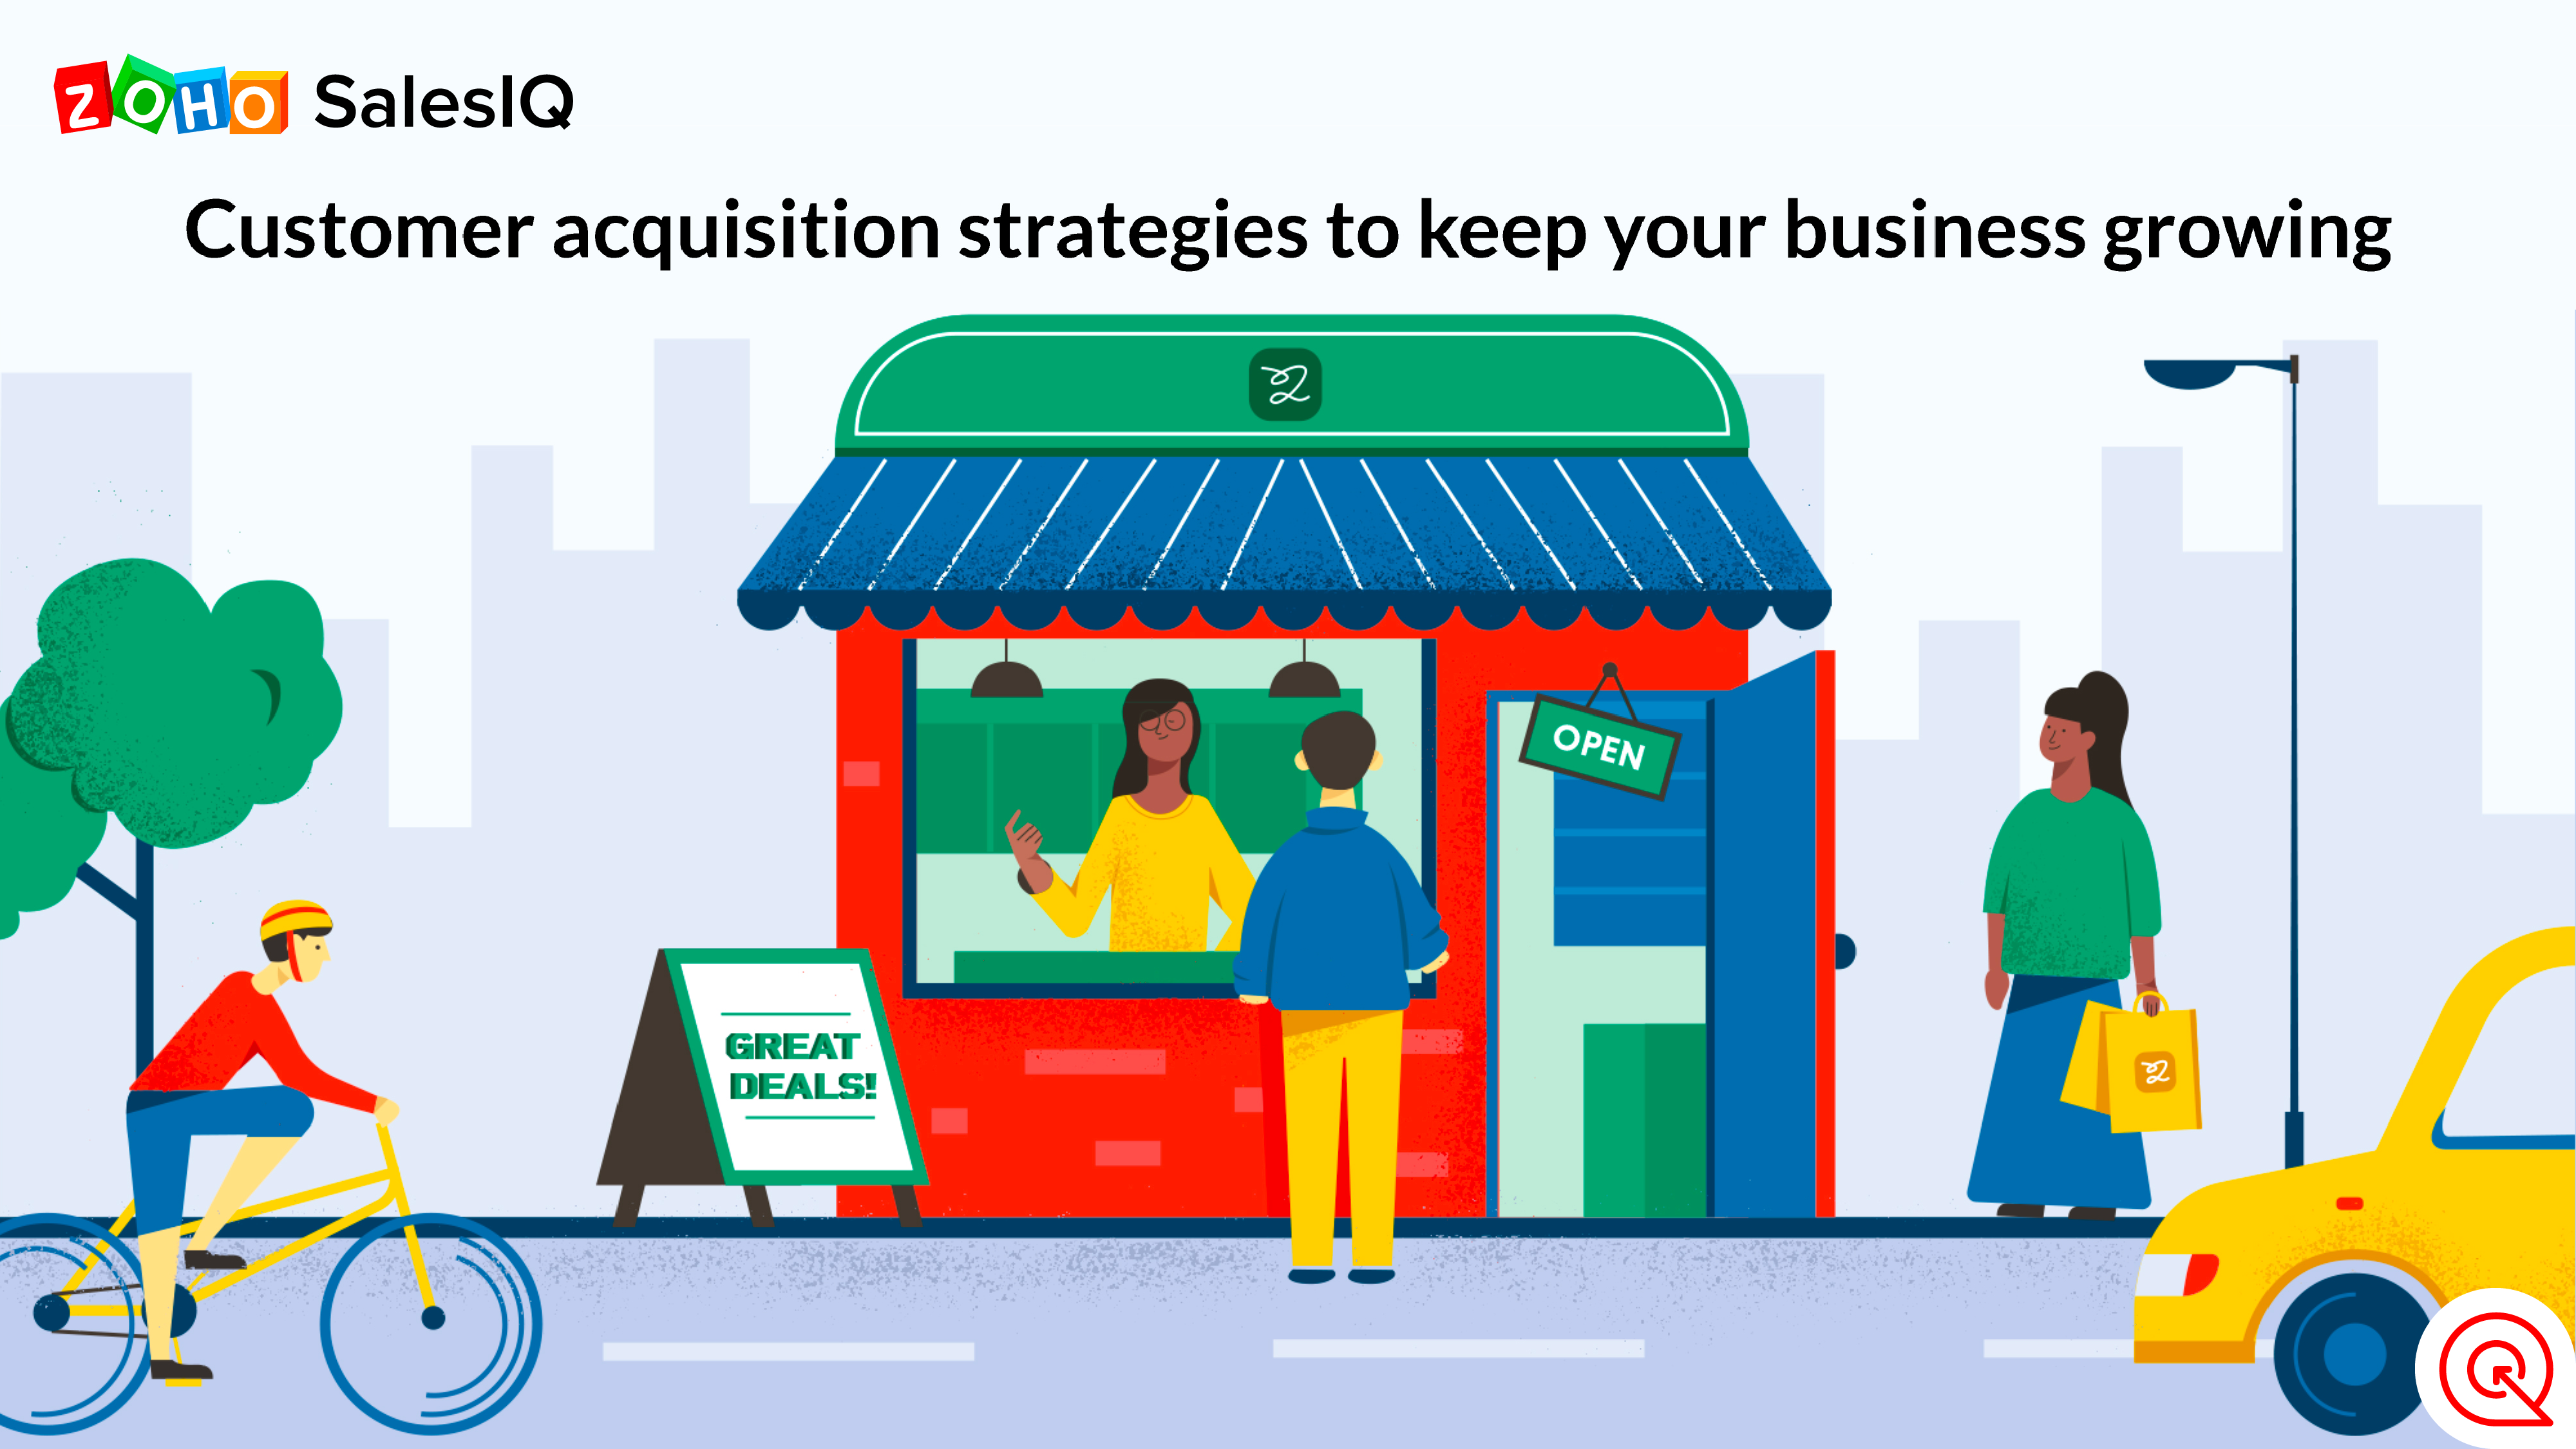 A complete guide to customer acquisition strategies